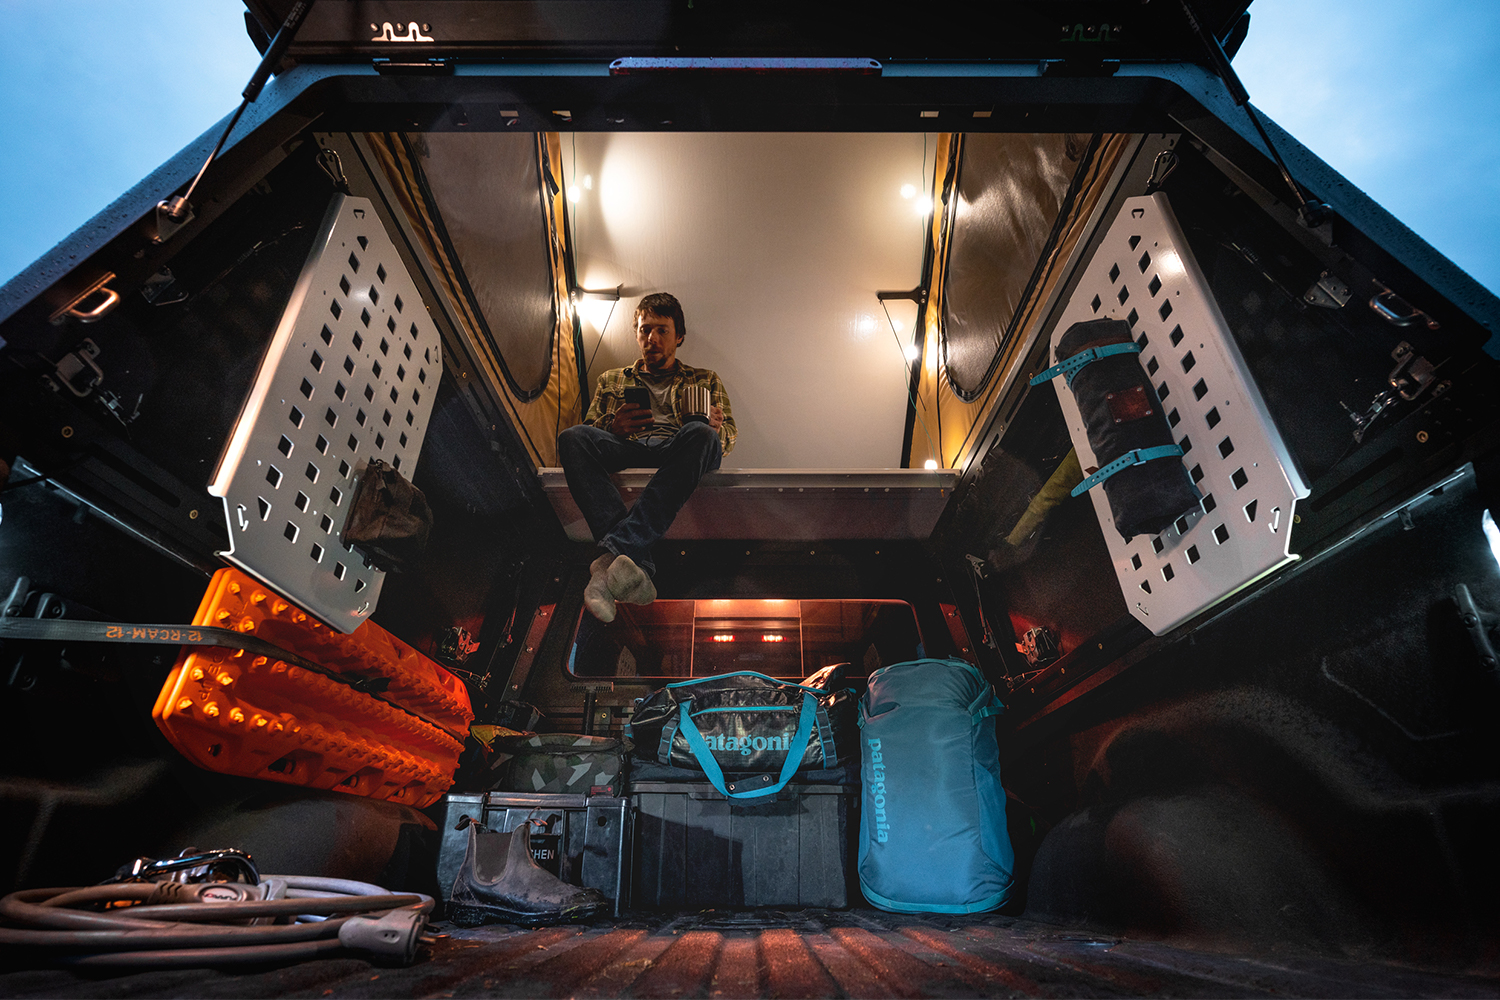 The inside of a truck camper from Super Pacific